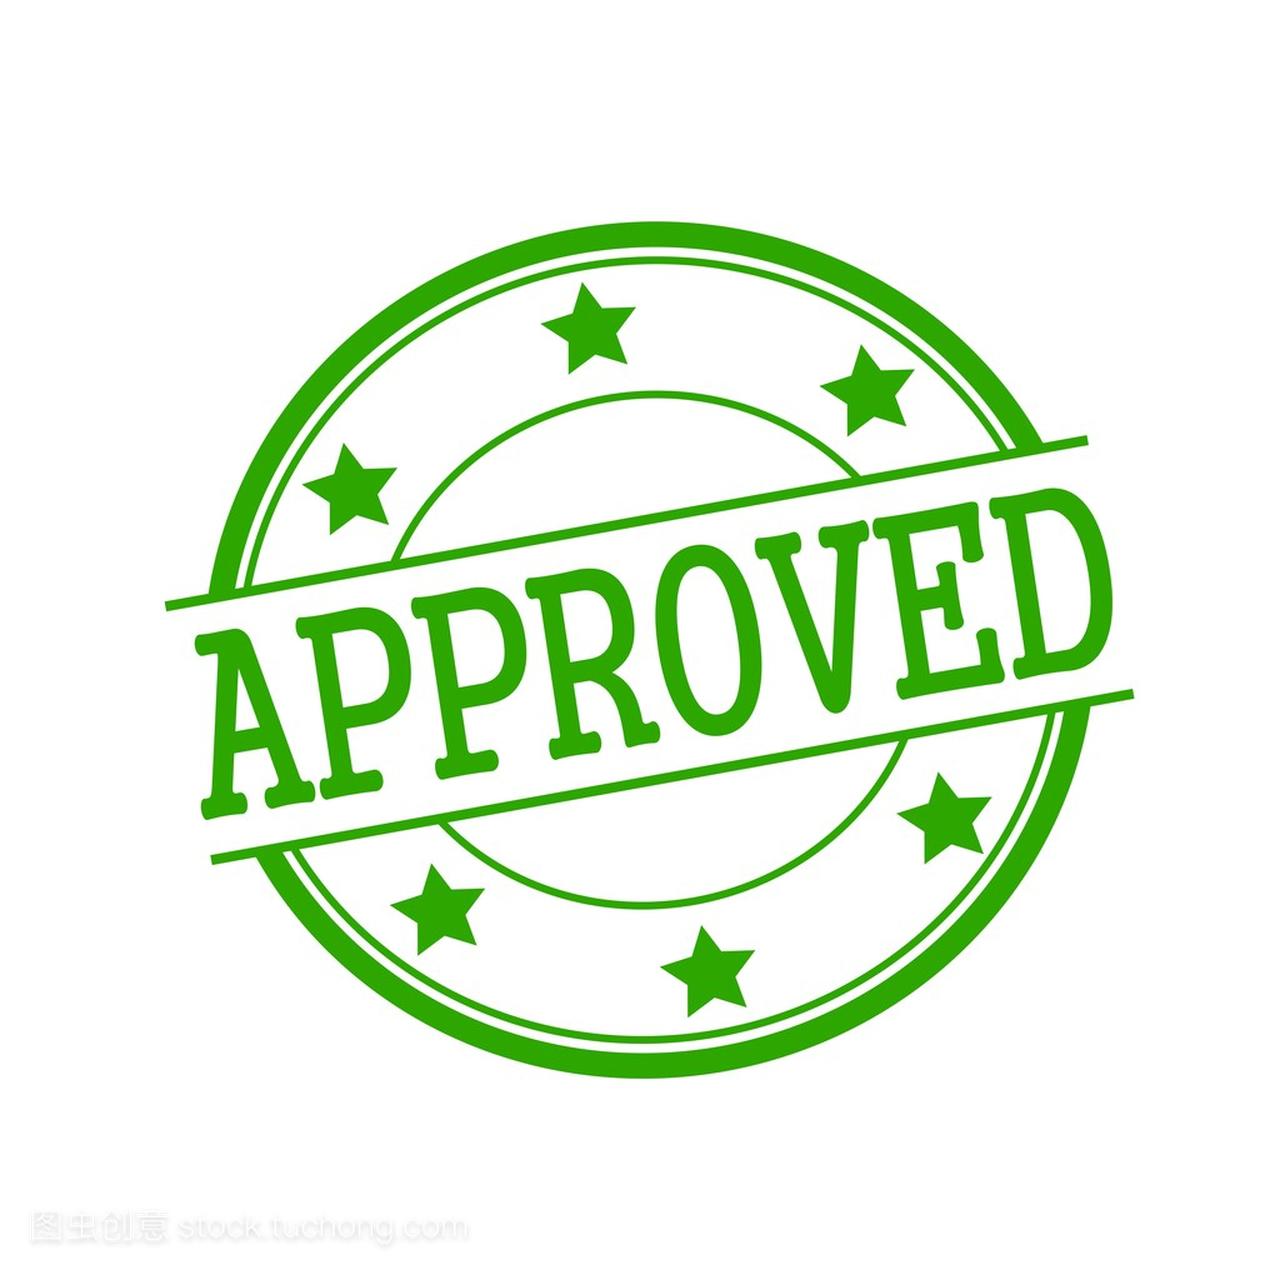 Approved green stamp text on green circle 